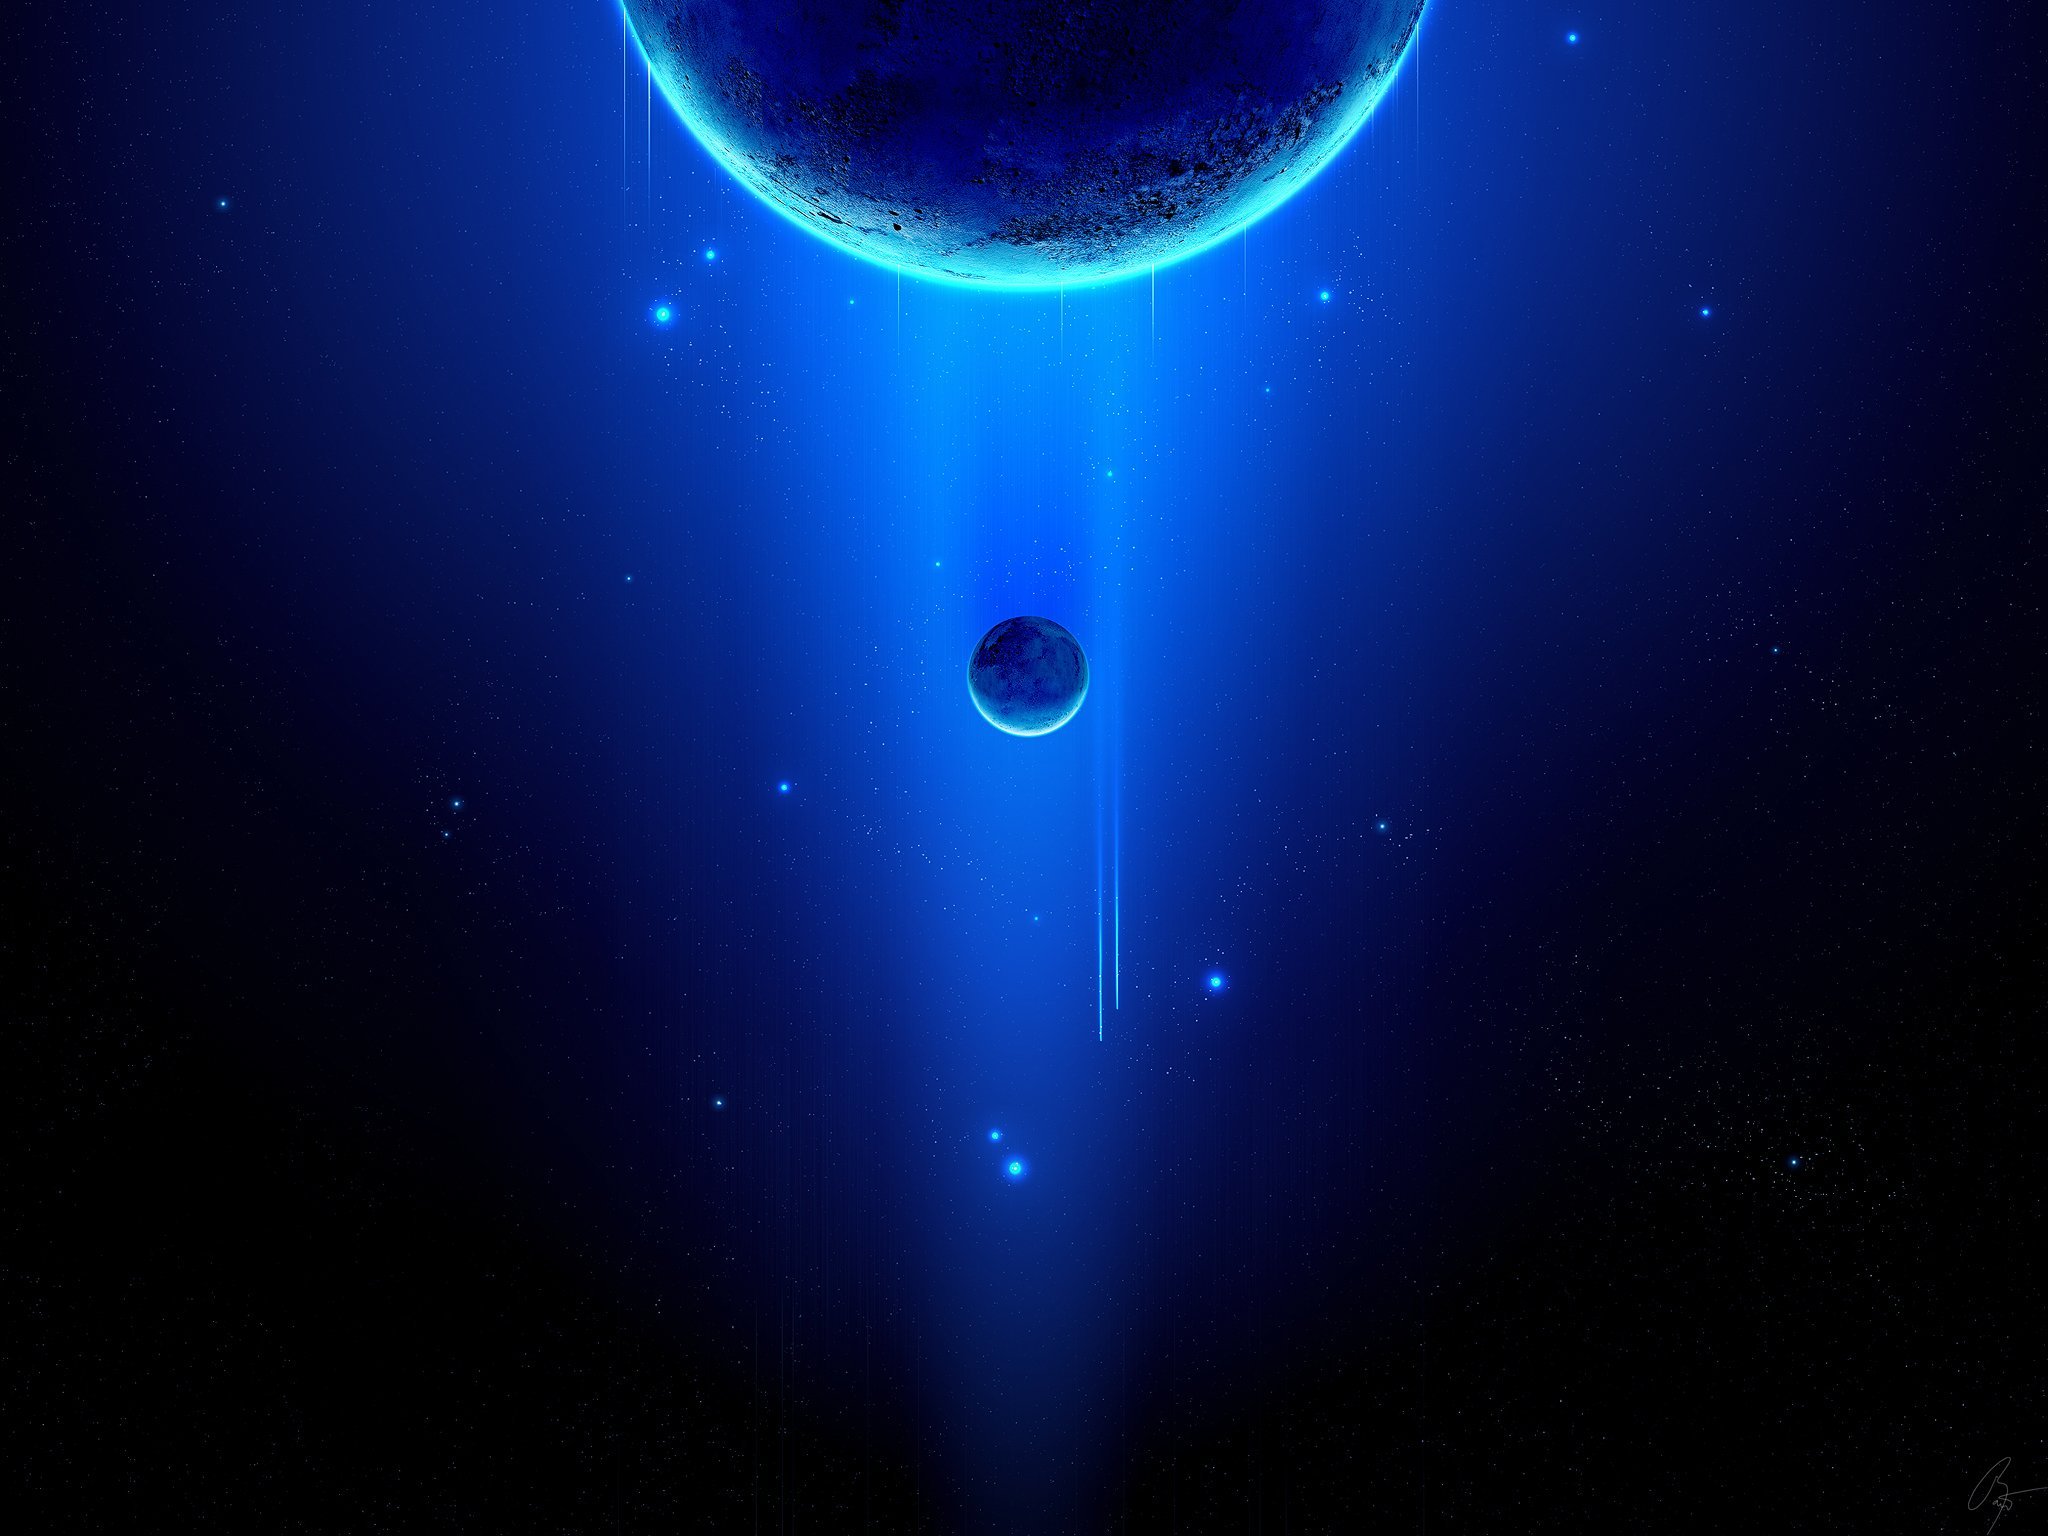 2001, Space, Odyssey, Sci fi, Mystery, Futuristic, Earth, Planet, Space, Stars, Moon Wallpaper